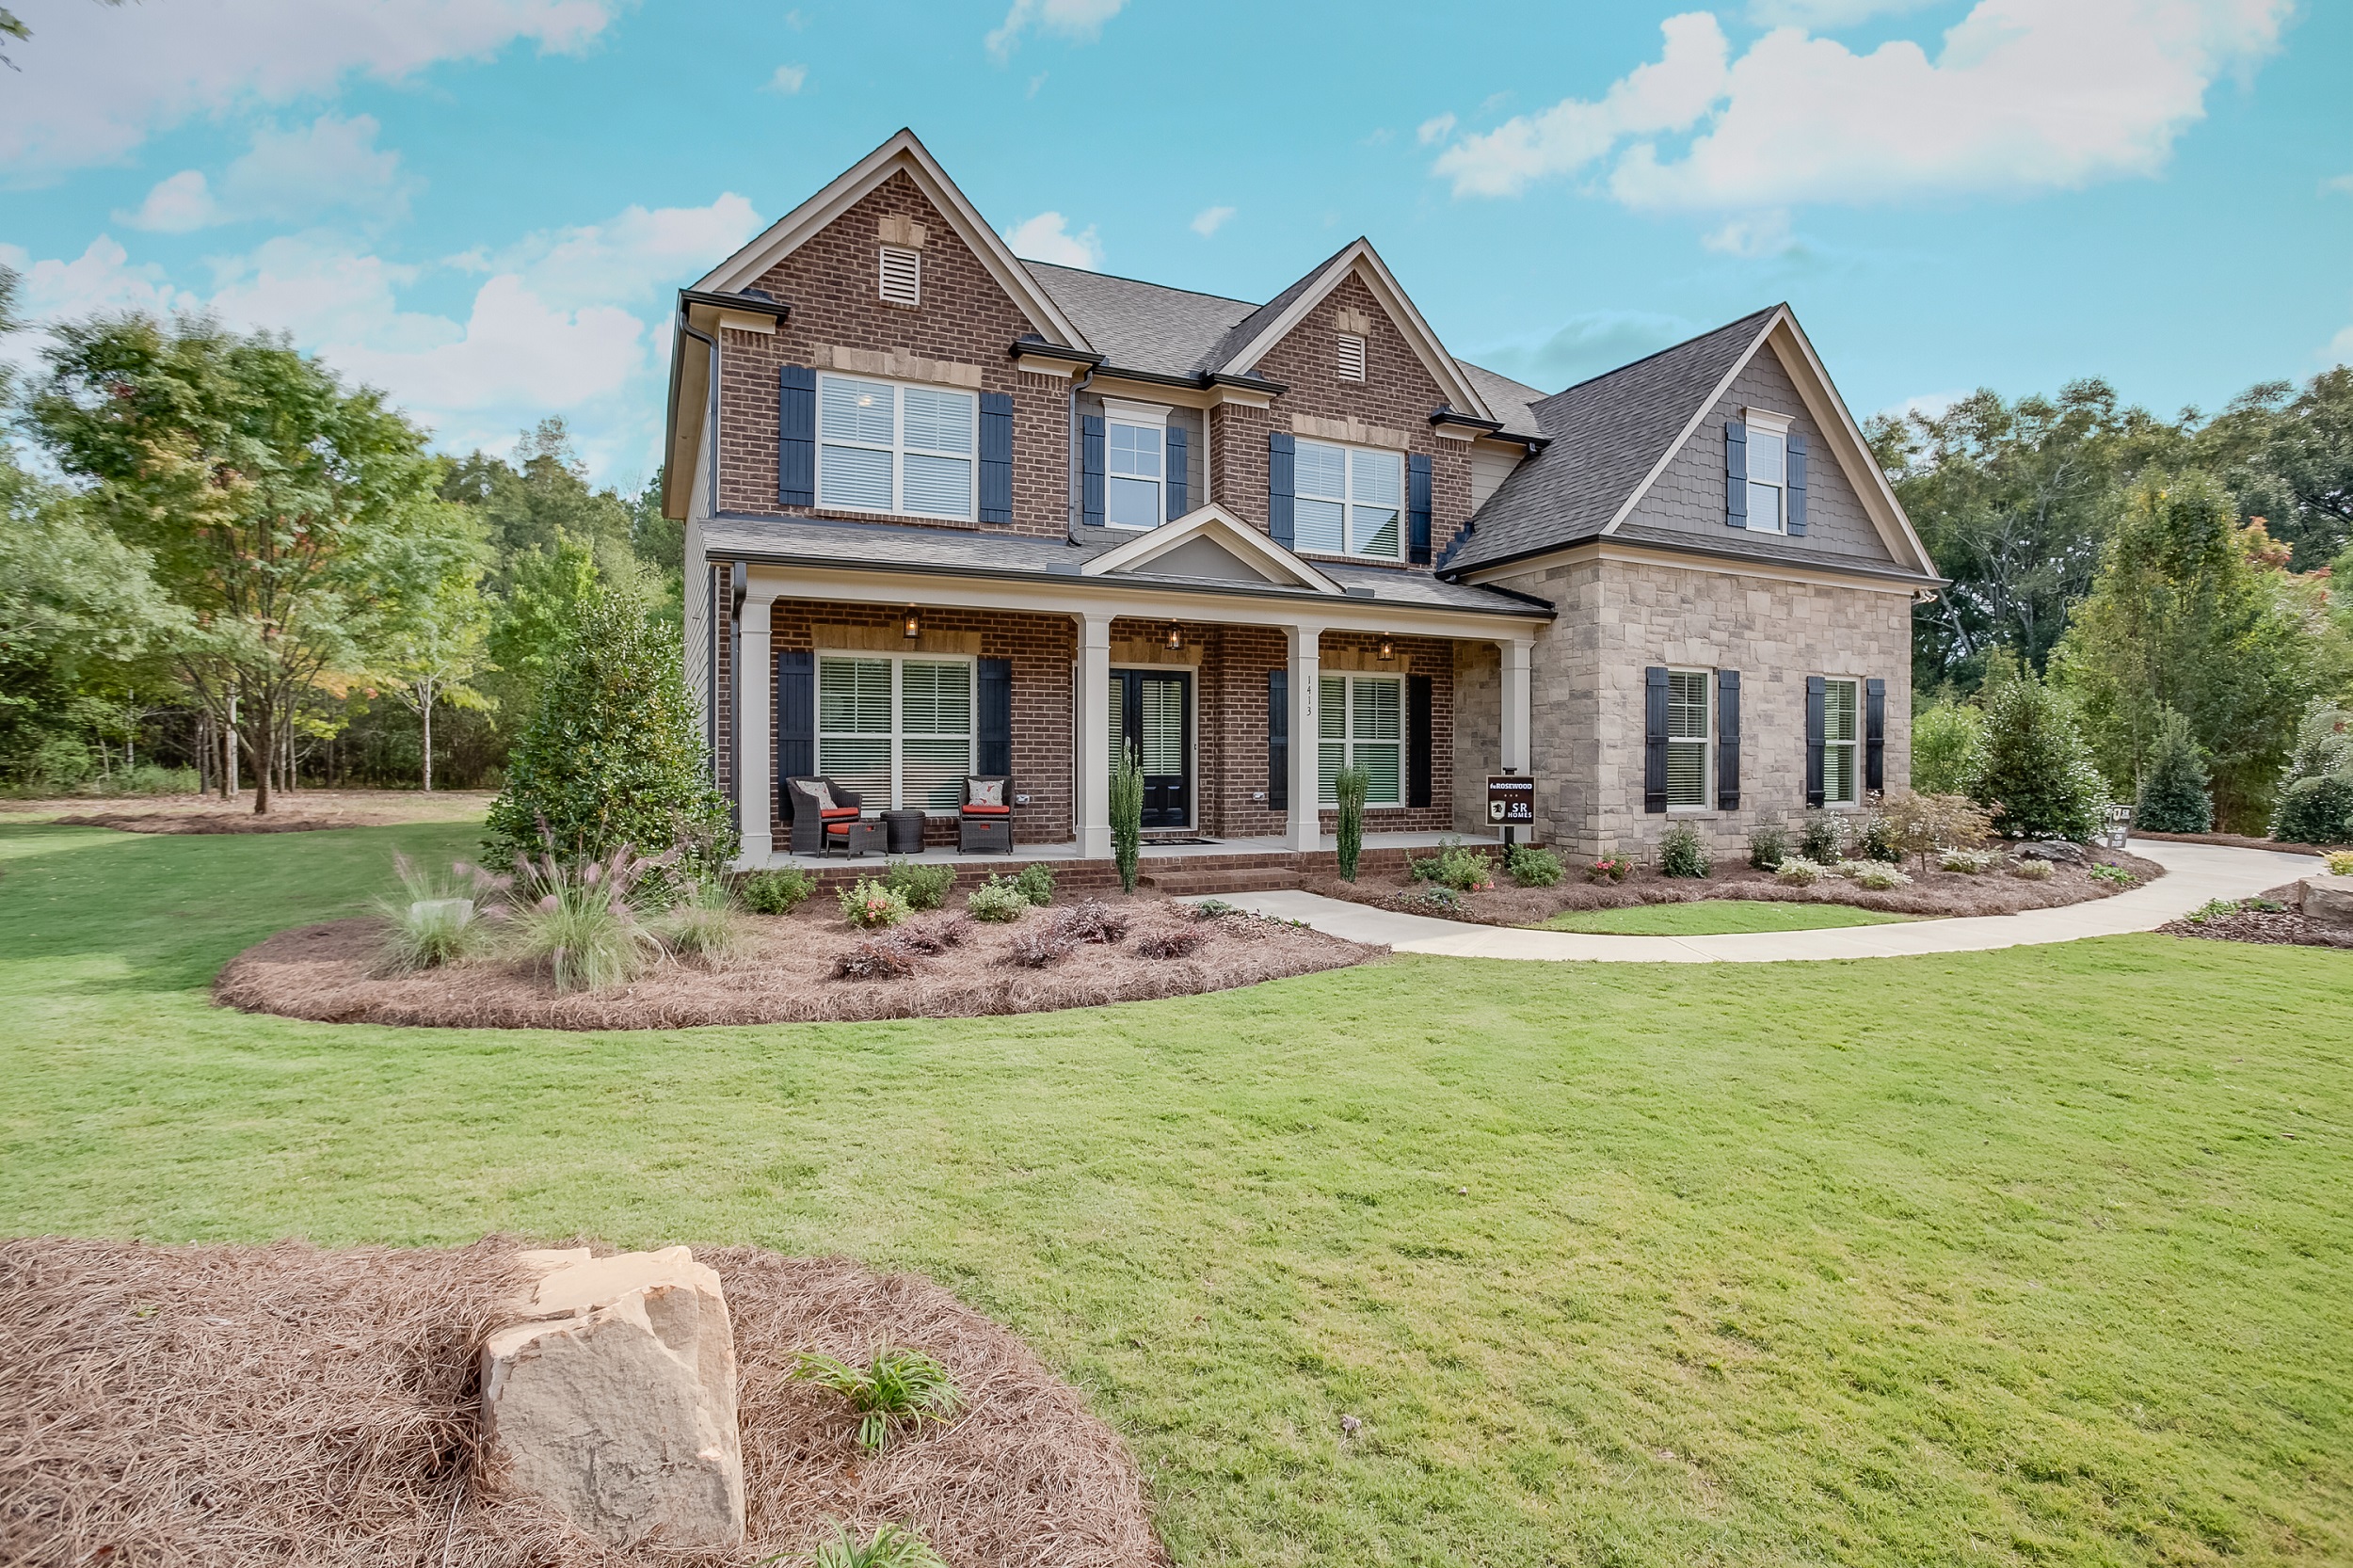 Rosweood Model Home at Pebble Creek